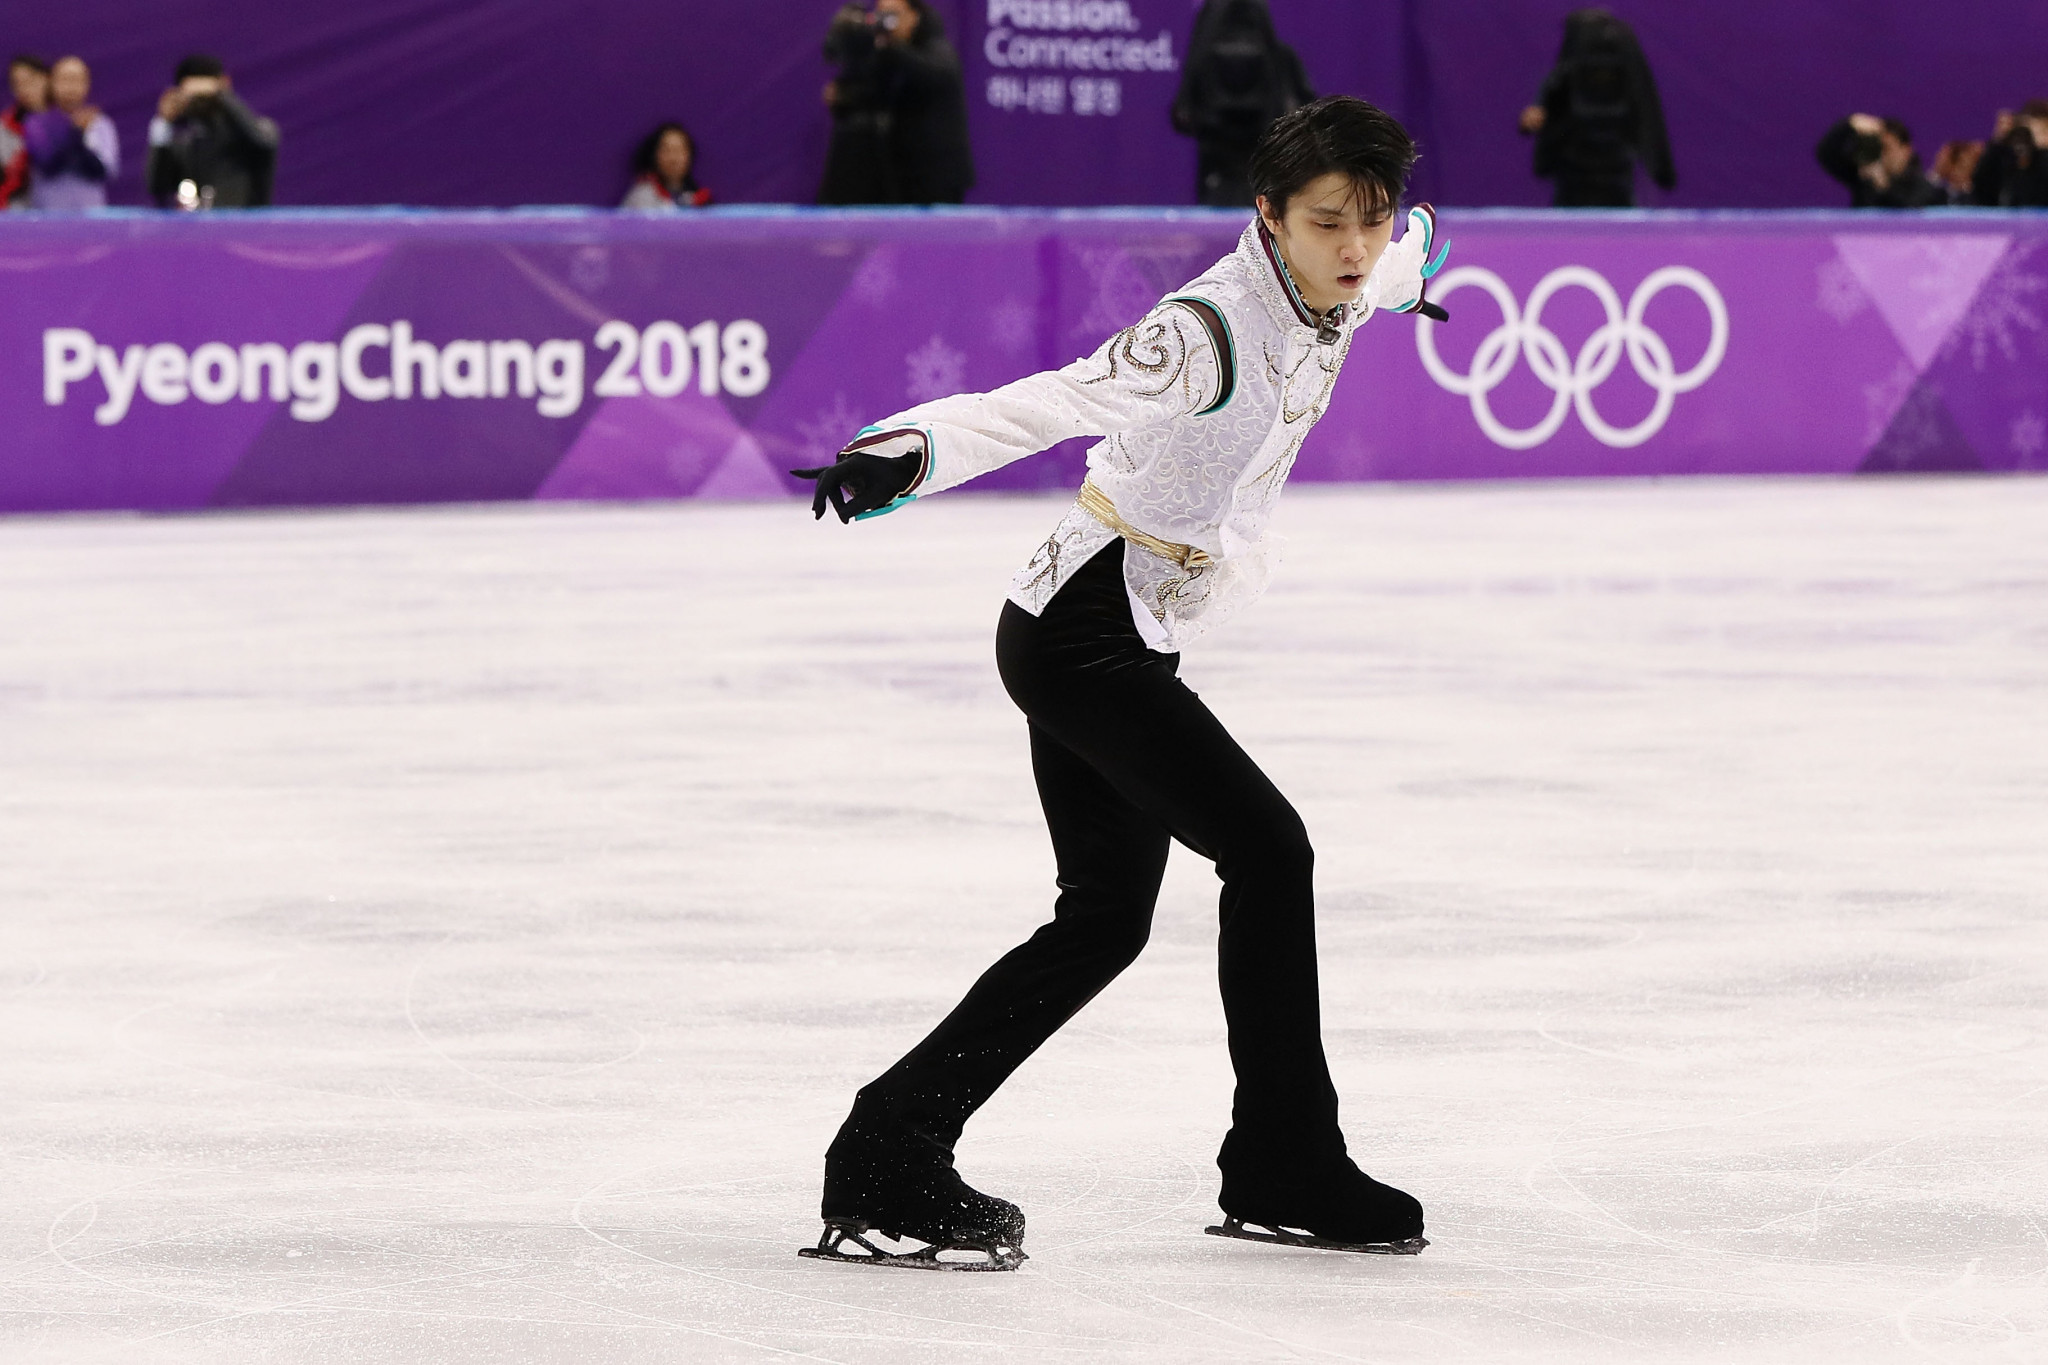 Yuzuru Hanyu retained his Olympic men's singles title at the Games in Pyeongchang last February ©Getty Images